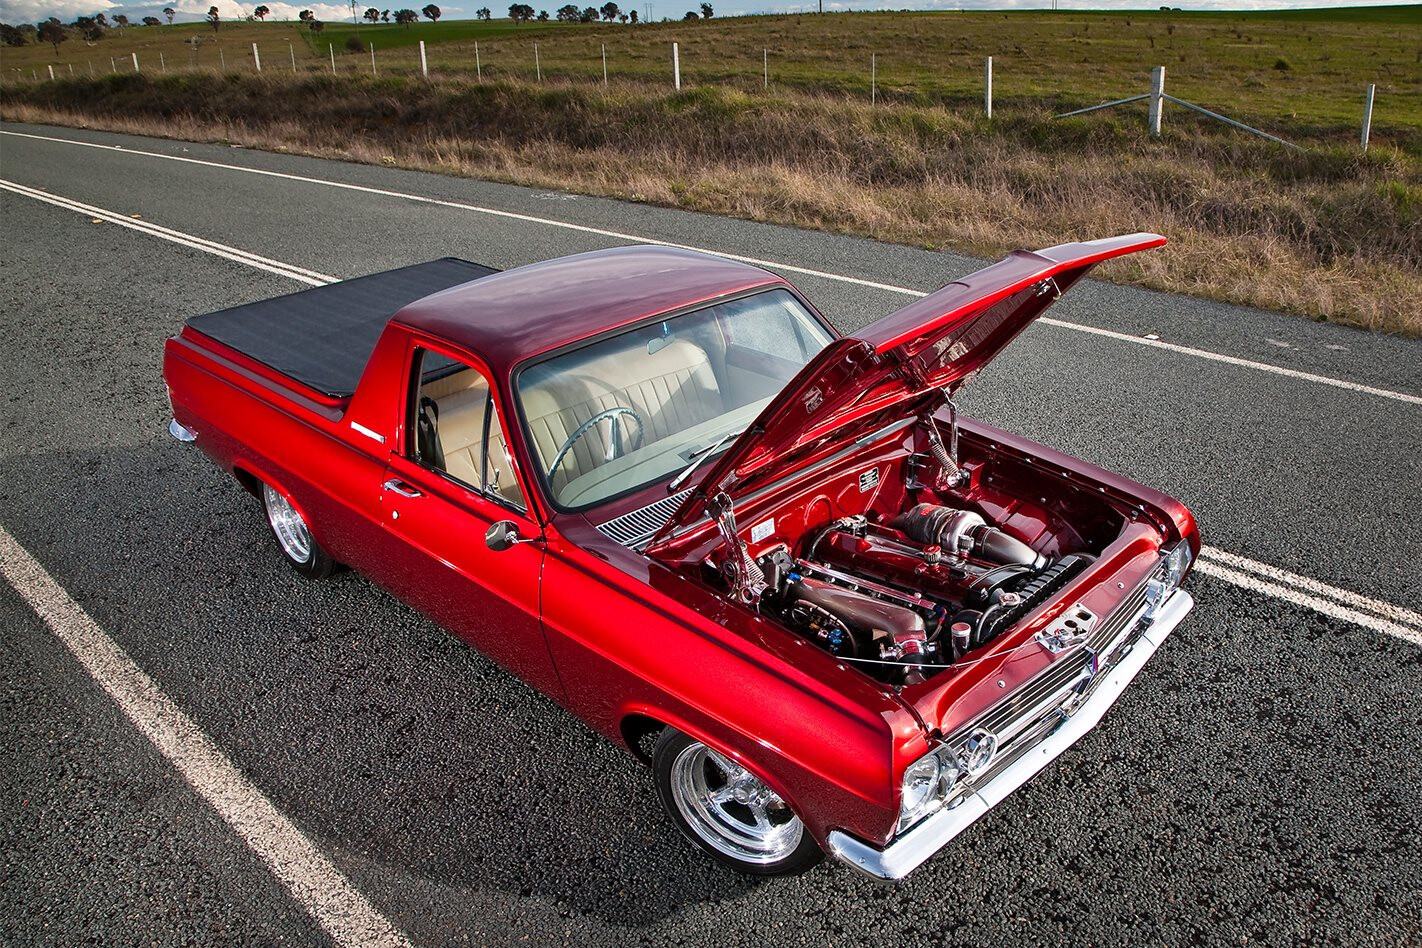 NATHAN BOOTH’S SMOTY-WINNING HR HOLDEN UTE